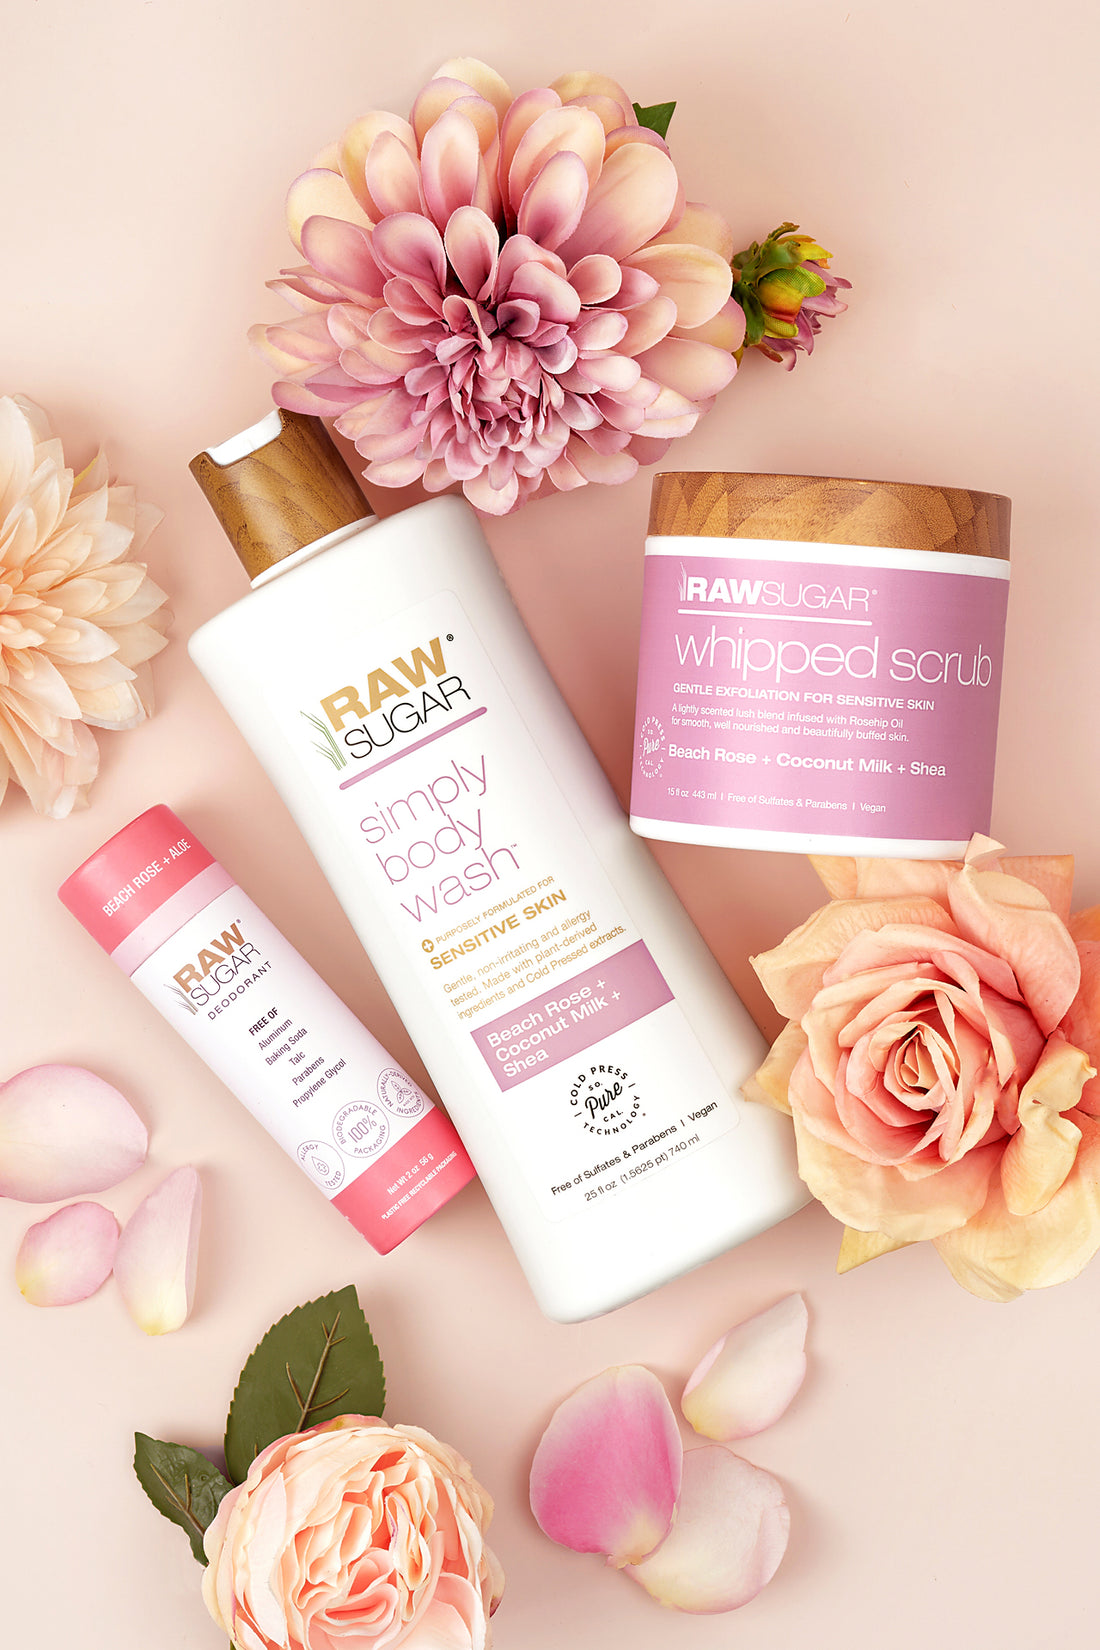 image of rose products surrounded by flowers